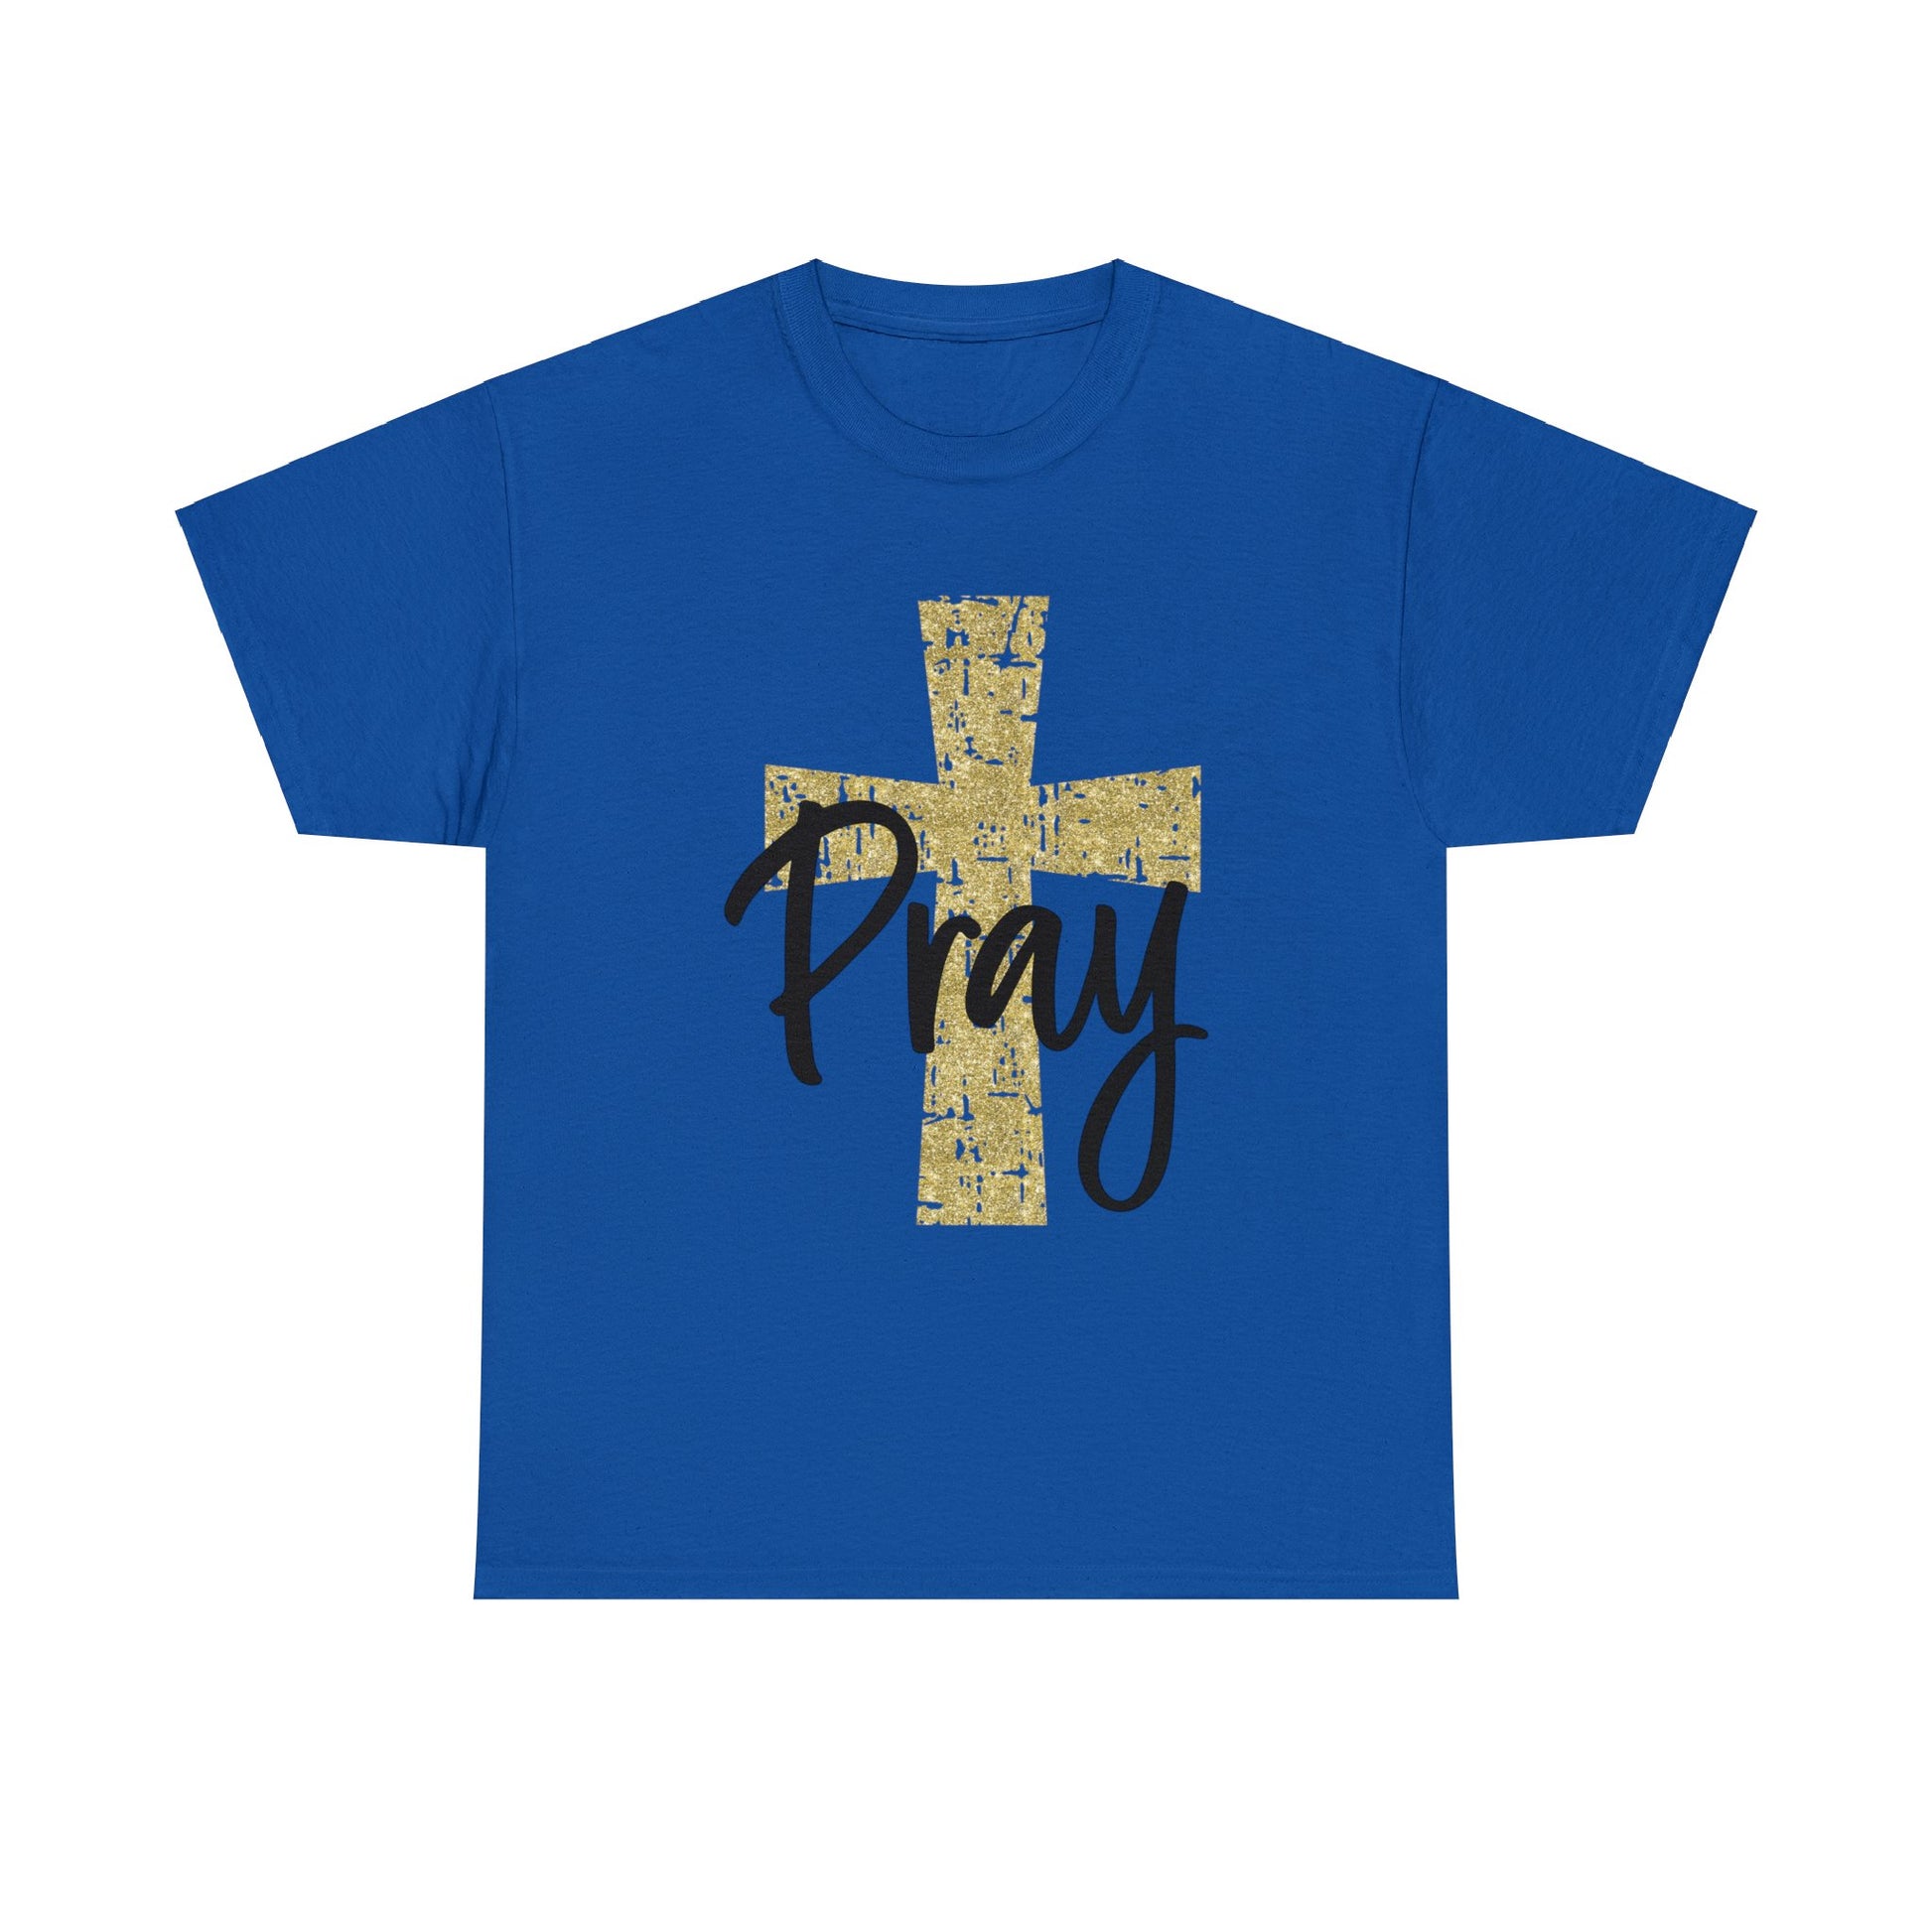 "Pray" T-Shirt - Weave Got Gifts - Unique Gifts You Won’t Find Anywhere Else!